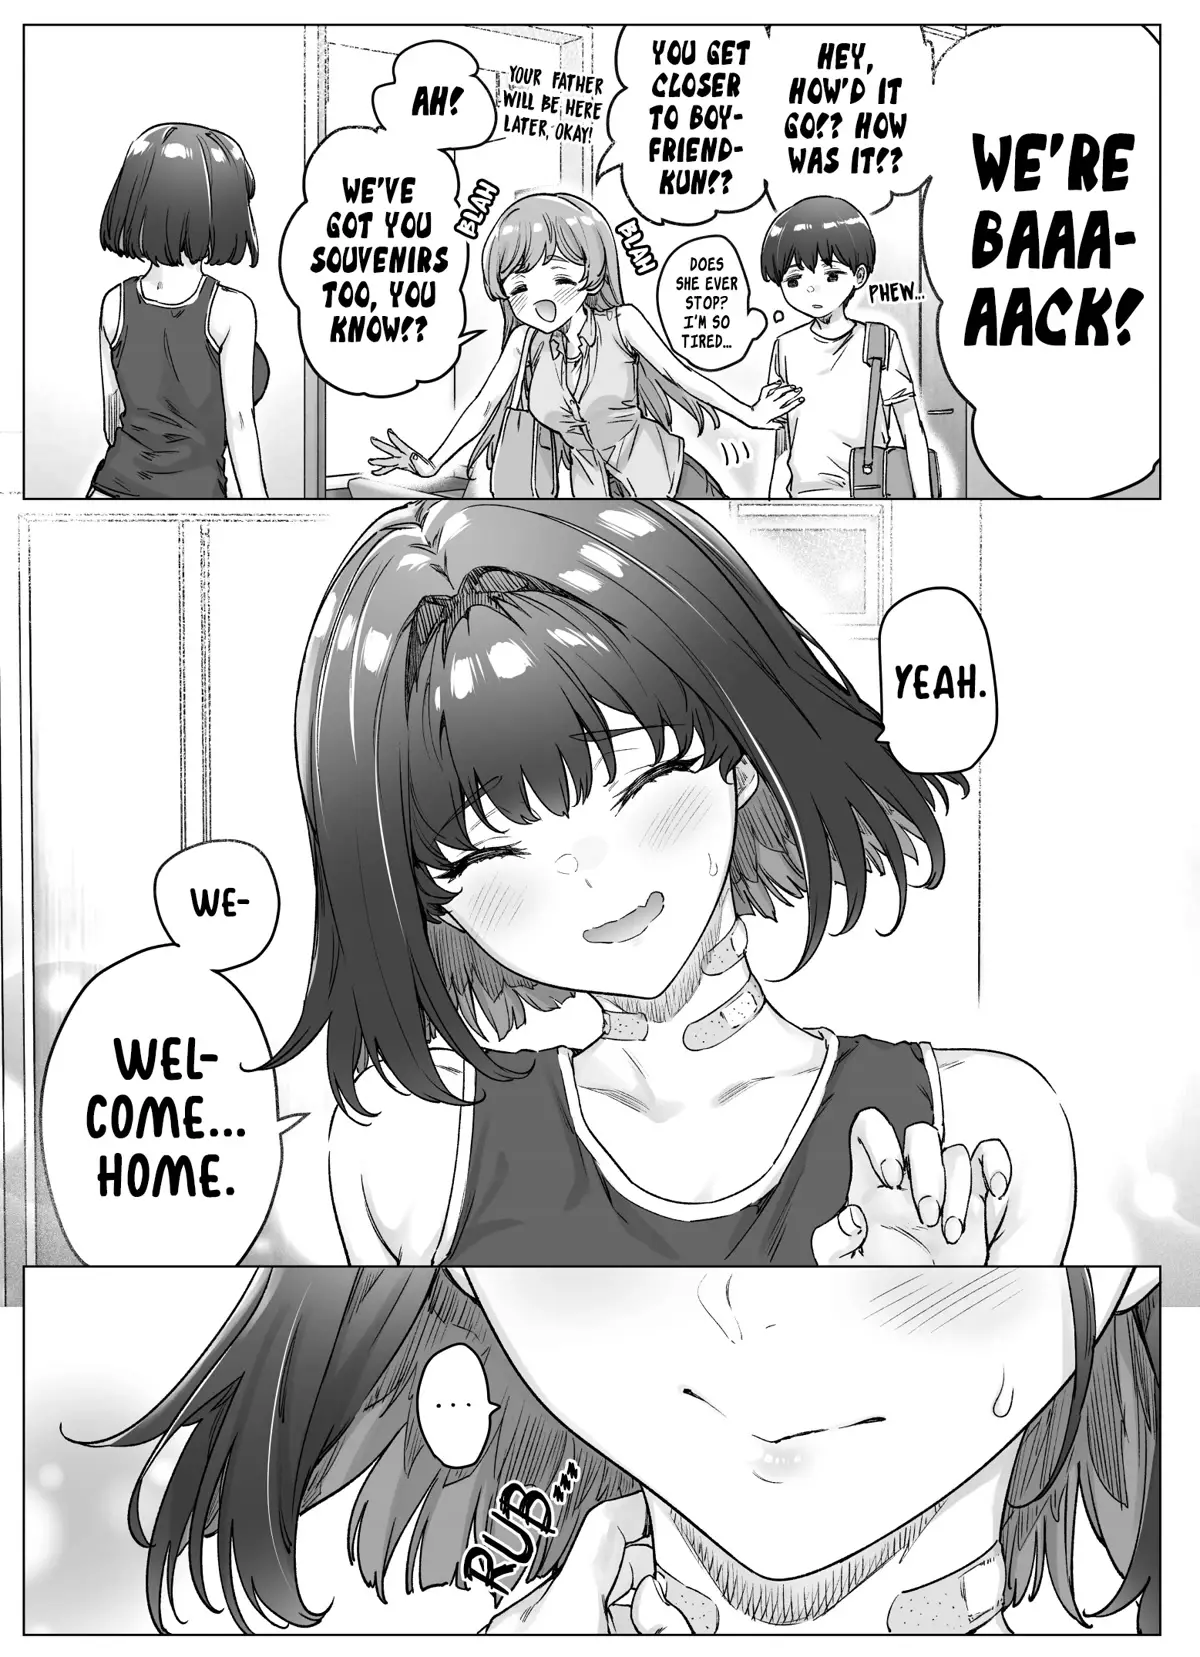 The Tsuntsuntsuntsuntsuntsun Tsuntsuntsuntsuntsundere Girl Getting Less And Less Tsun Day By Day - 81 page 1-4af248d0